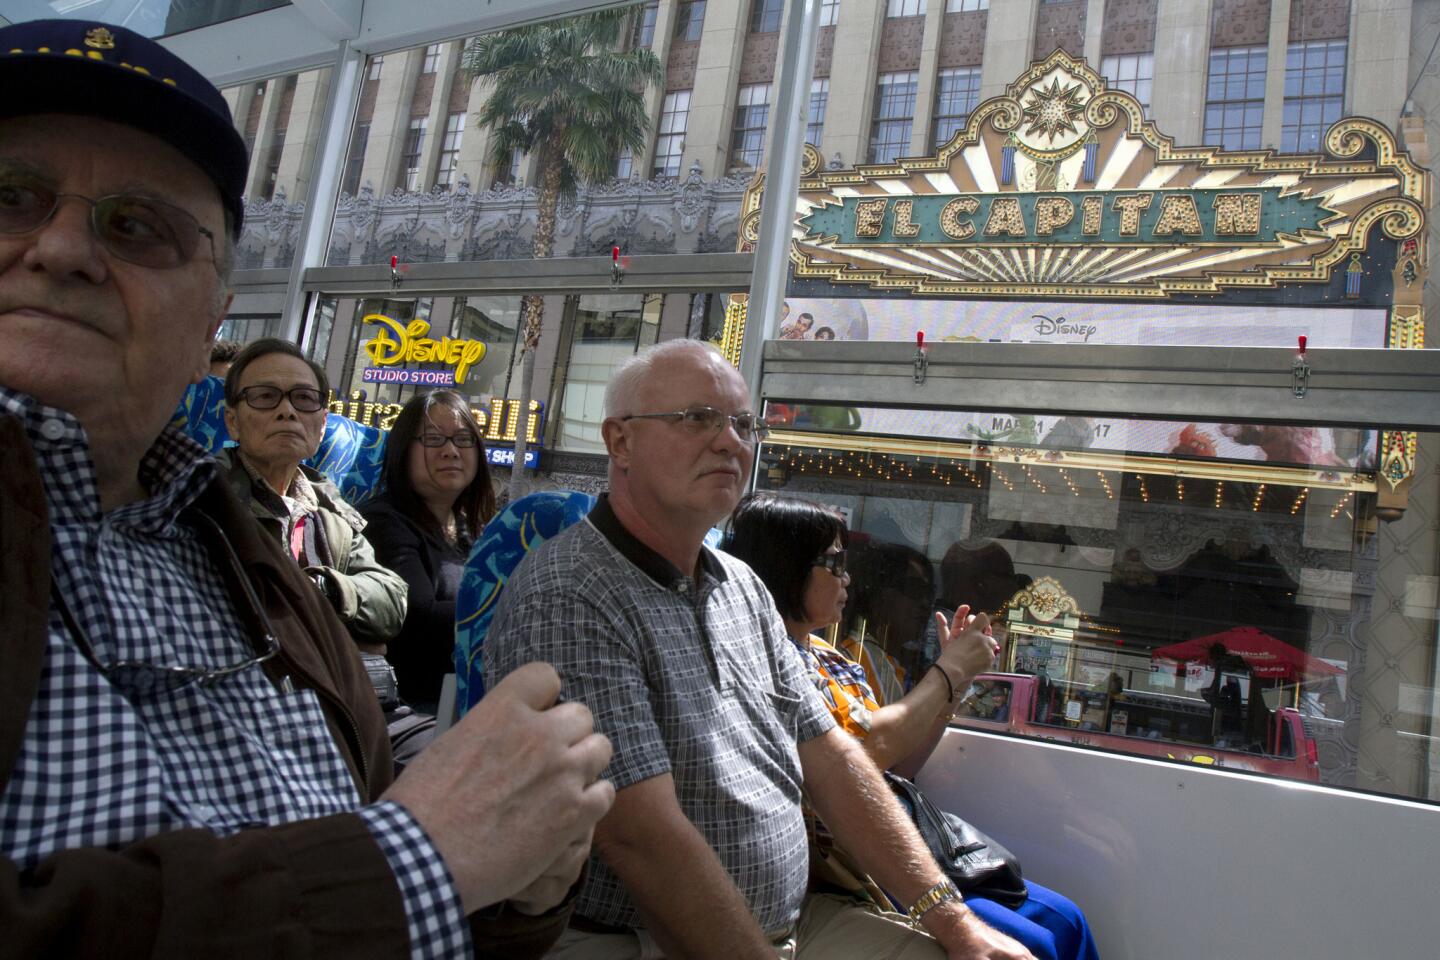 Movie fans ride a tour bus around Hollywood and Los Angeles on March 28, 2014. Turner Classic Movies (TCM) teamed up with Starline Tours to offer more than 20 excursions to current film locations, studios and historical film landmarks as part of TCM's 20th anniversary celebrations April 10-13.